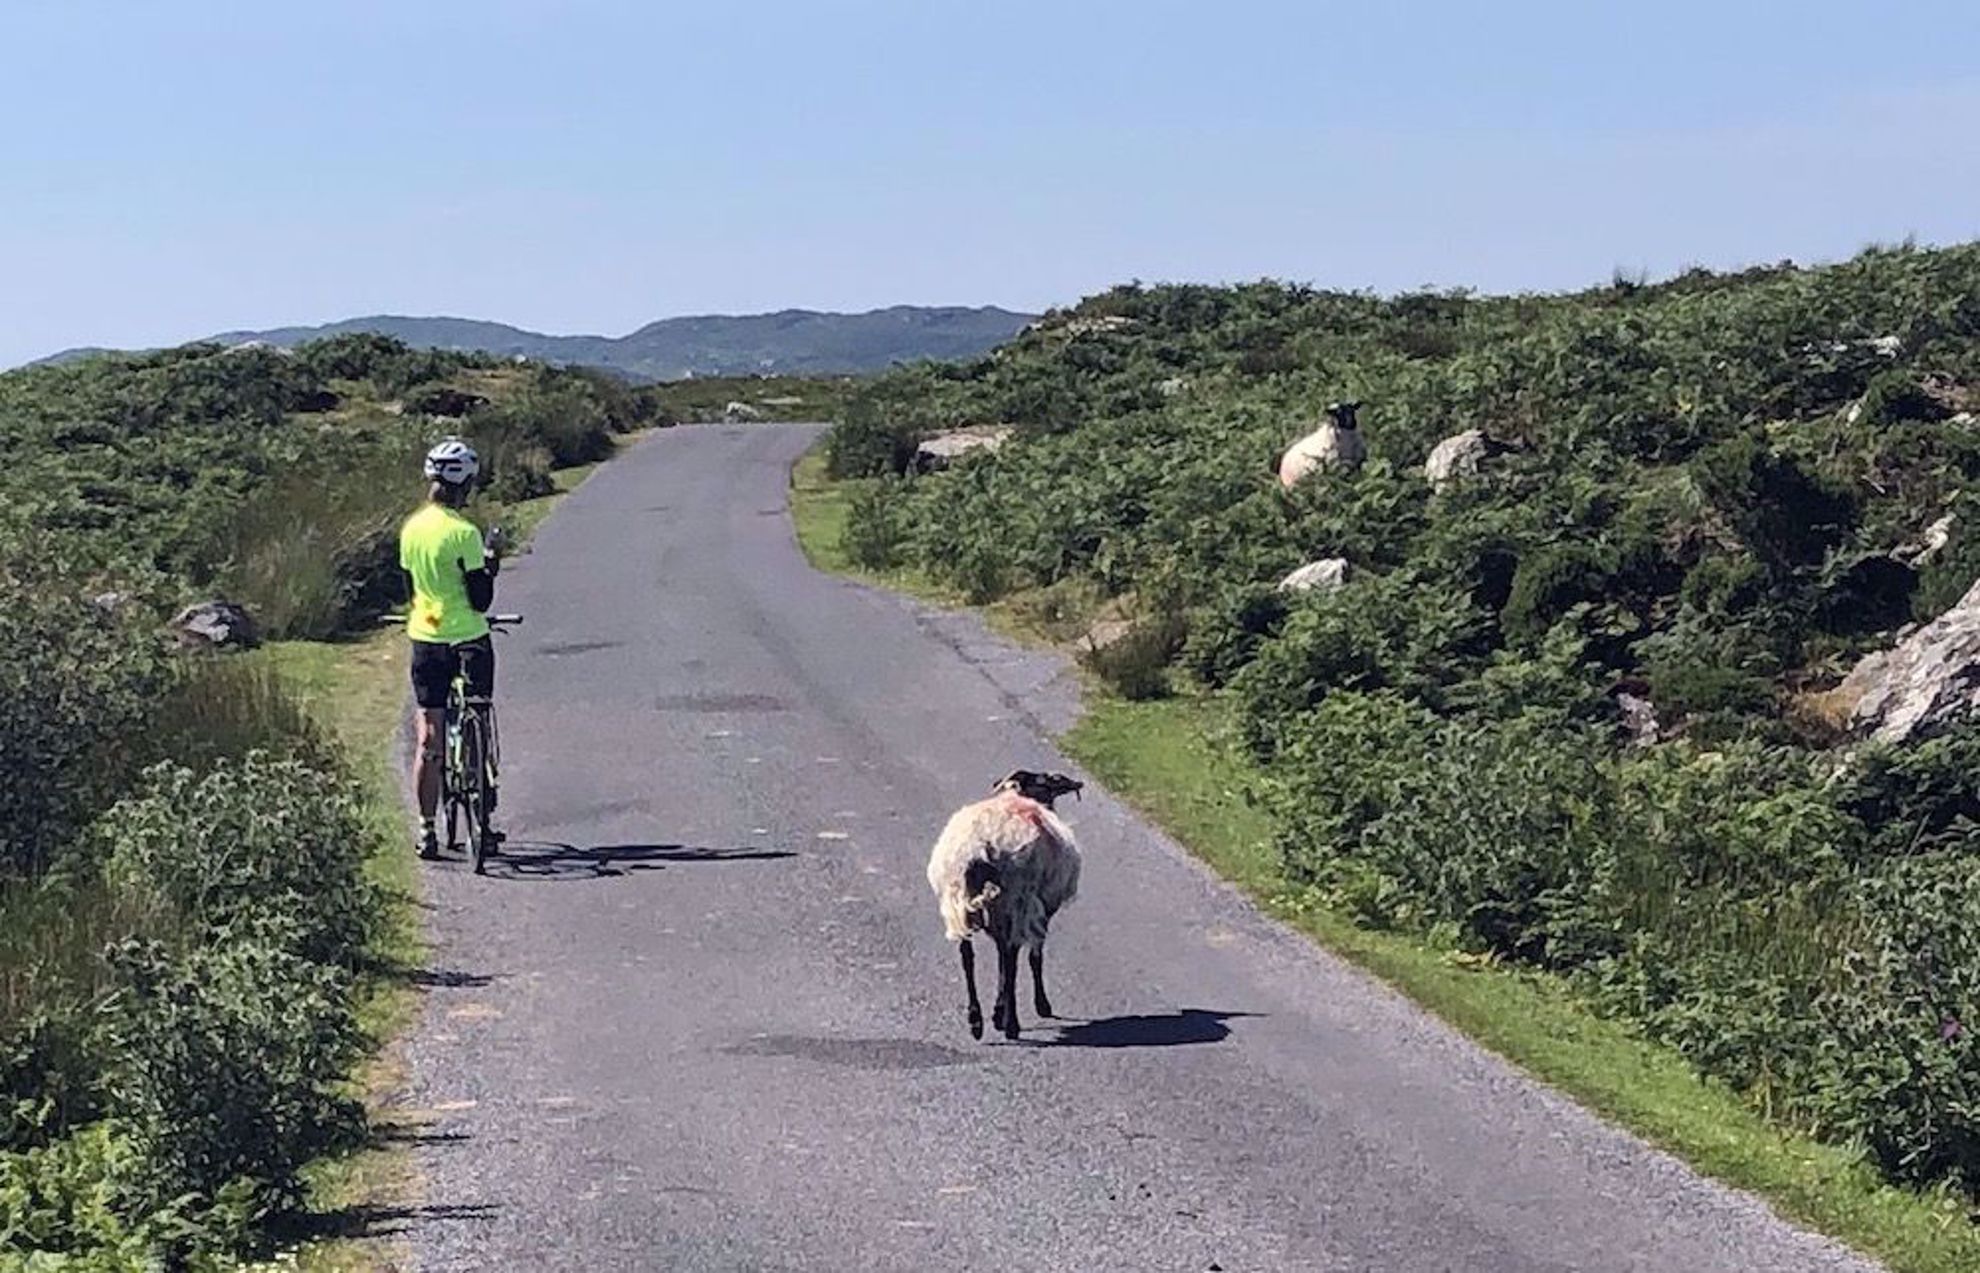 Riding with sheep friends